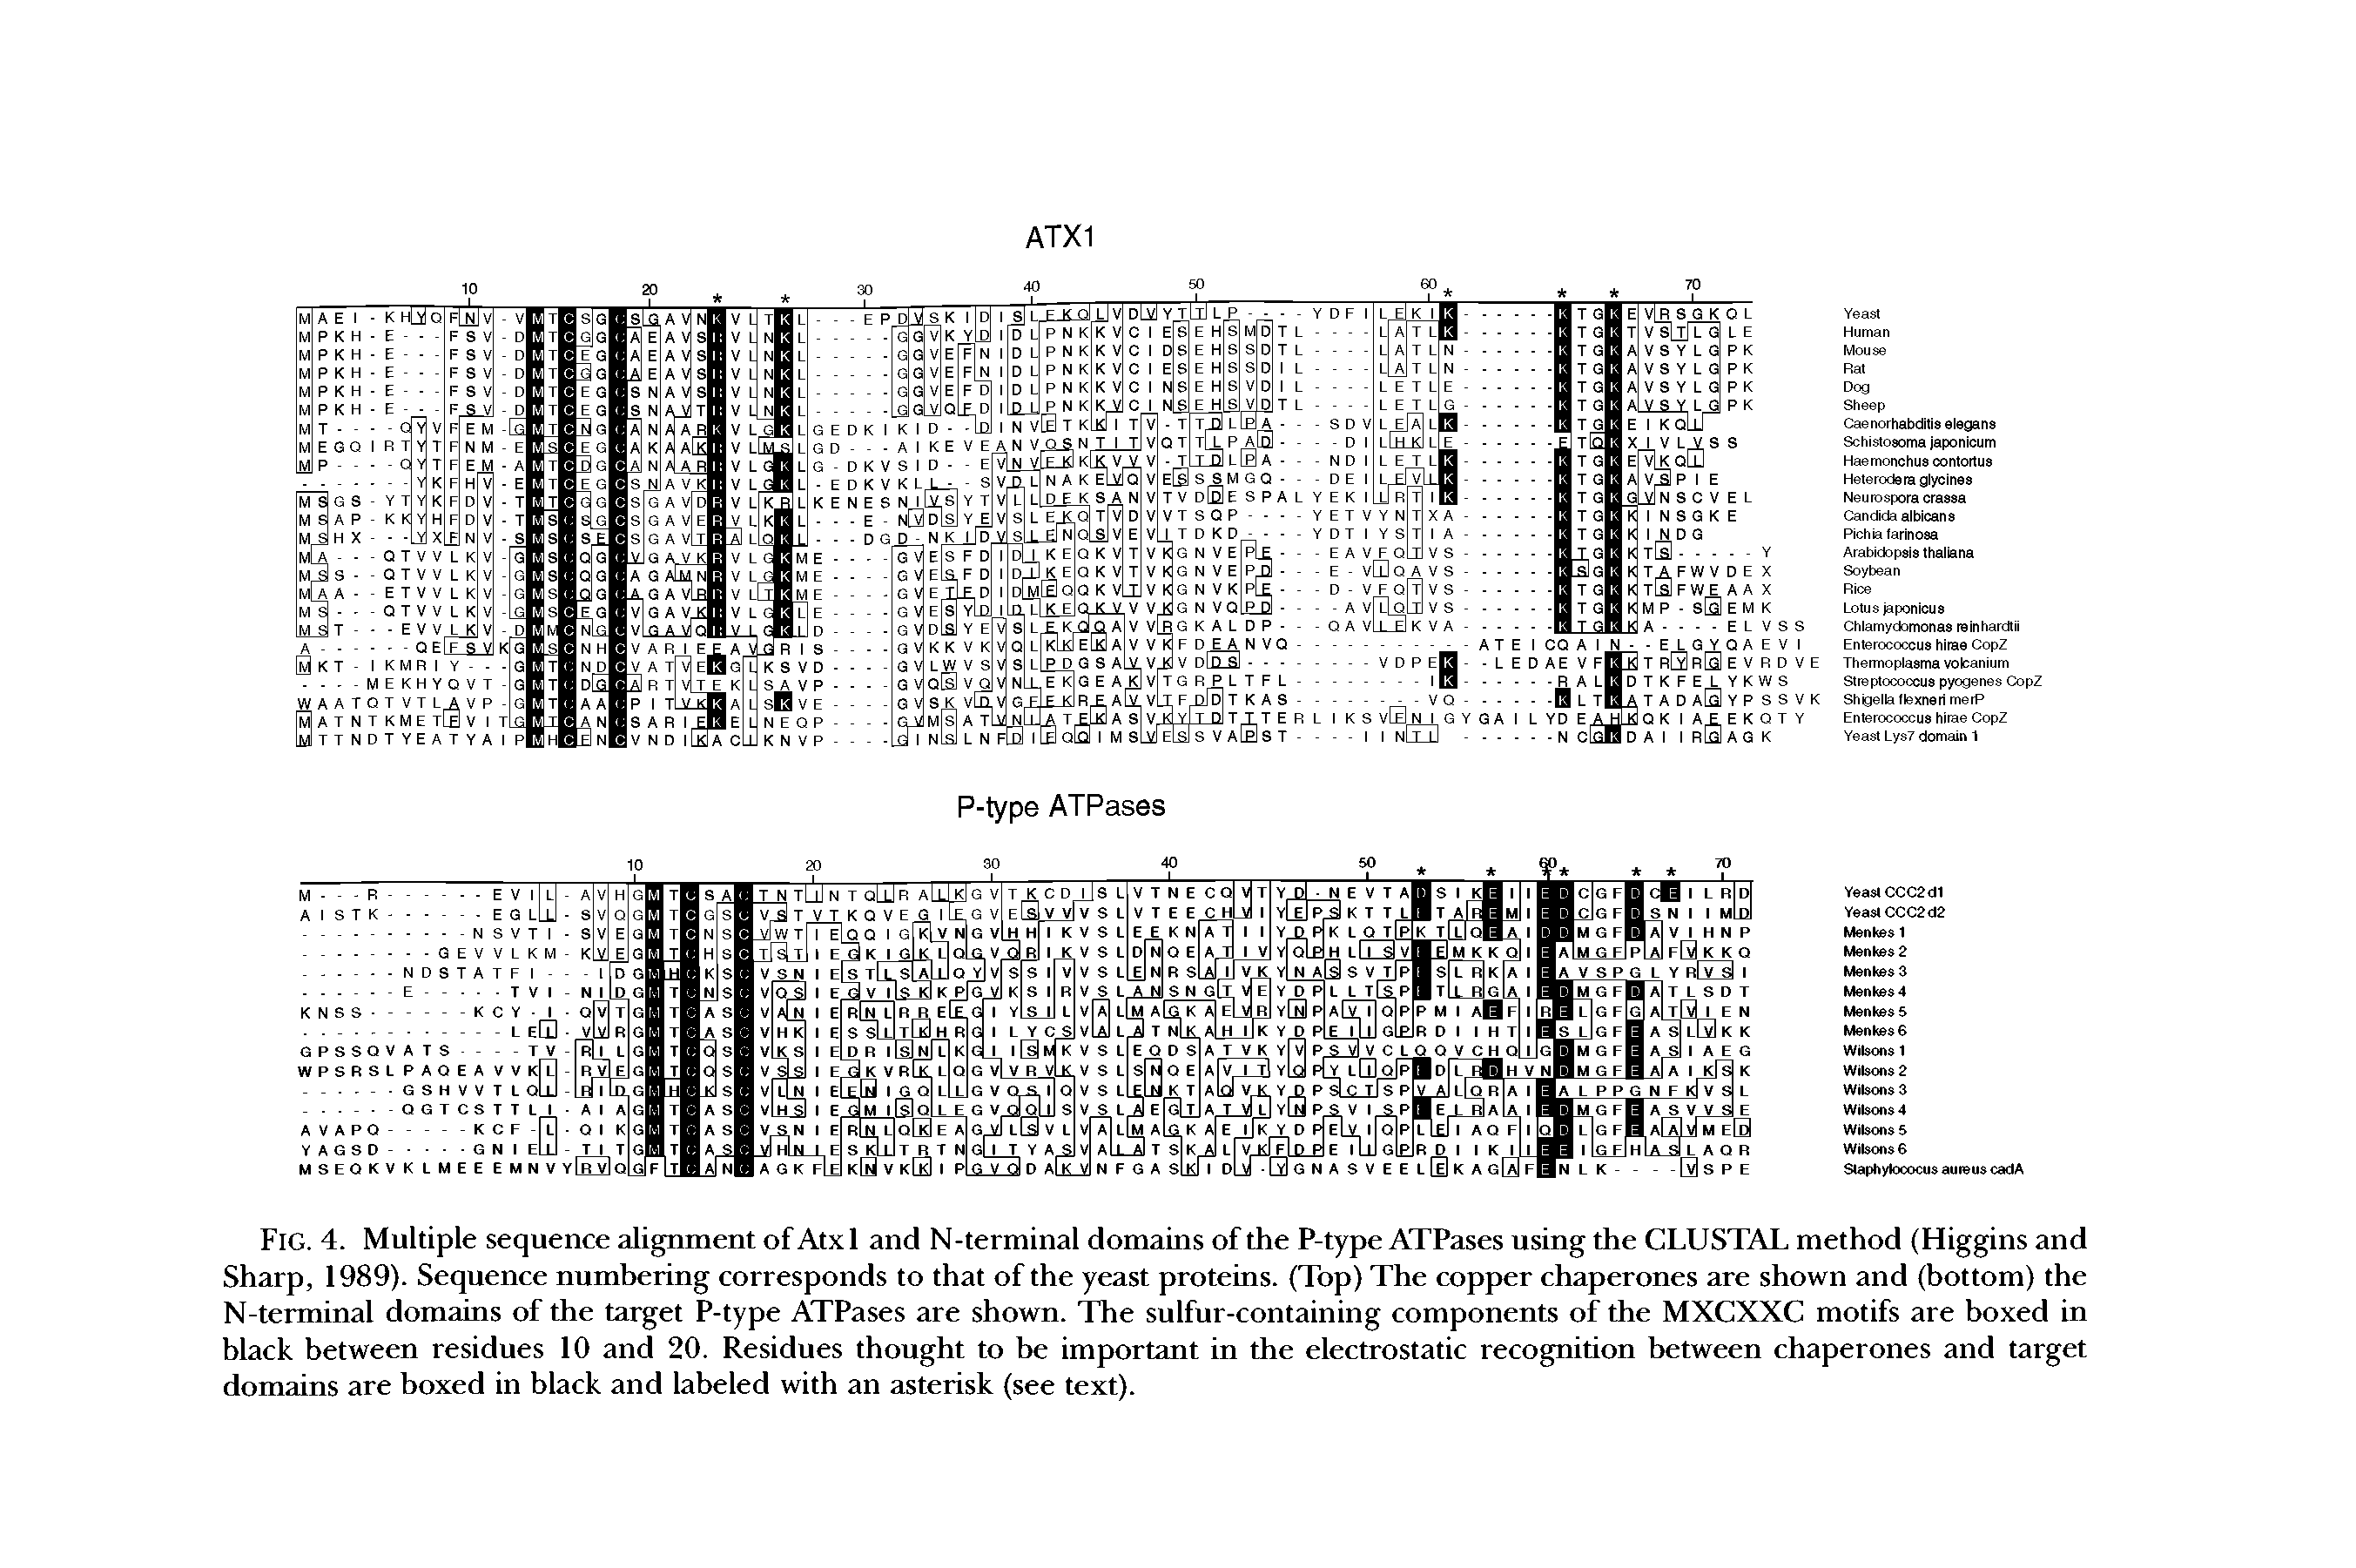 Fig. 4. Multiple sequence alignment of Atx 1 and N-terminal domains of the P-type ATPases using the CLUSTAL method (Higgins and Sharp, 1989). Sequence numbering corresponds to that of the yeast proteins. (Top) The copper chaperones are shown and (bottom) the N-terminal domains of the target P-type ATPases are shown. The sulfur-containing components of the MXCXXC motifs are boxed in black between residues 10 and 20. Residues thought to be important in the electrostatic recognition between chaperones and target domains are boxed in black and labeled with an asterisk (see text).